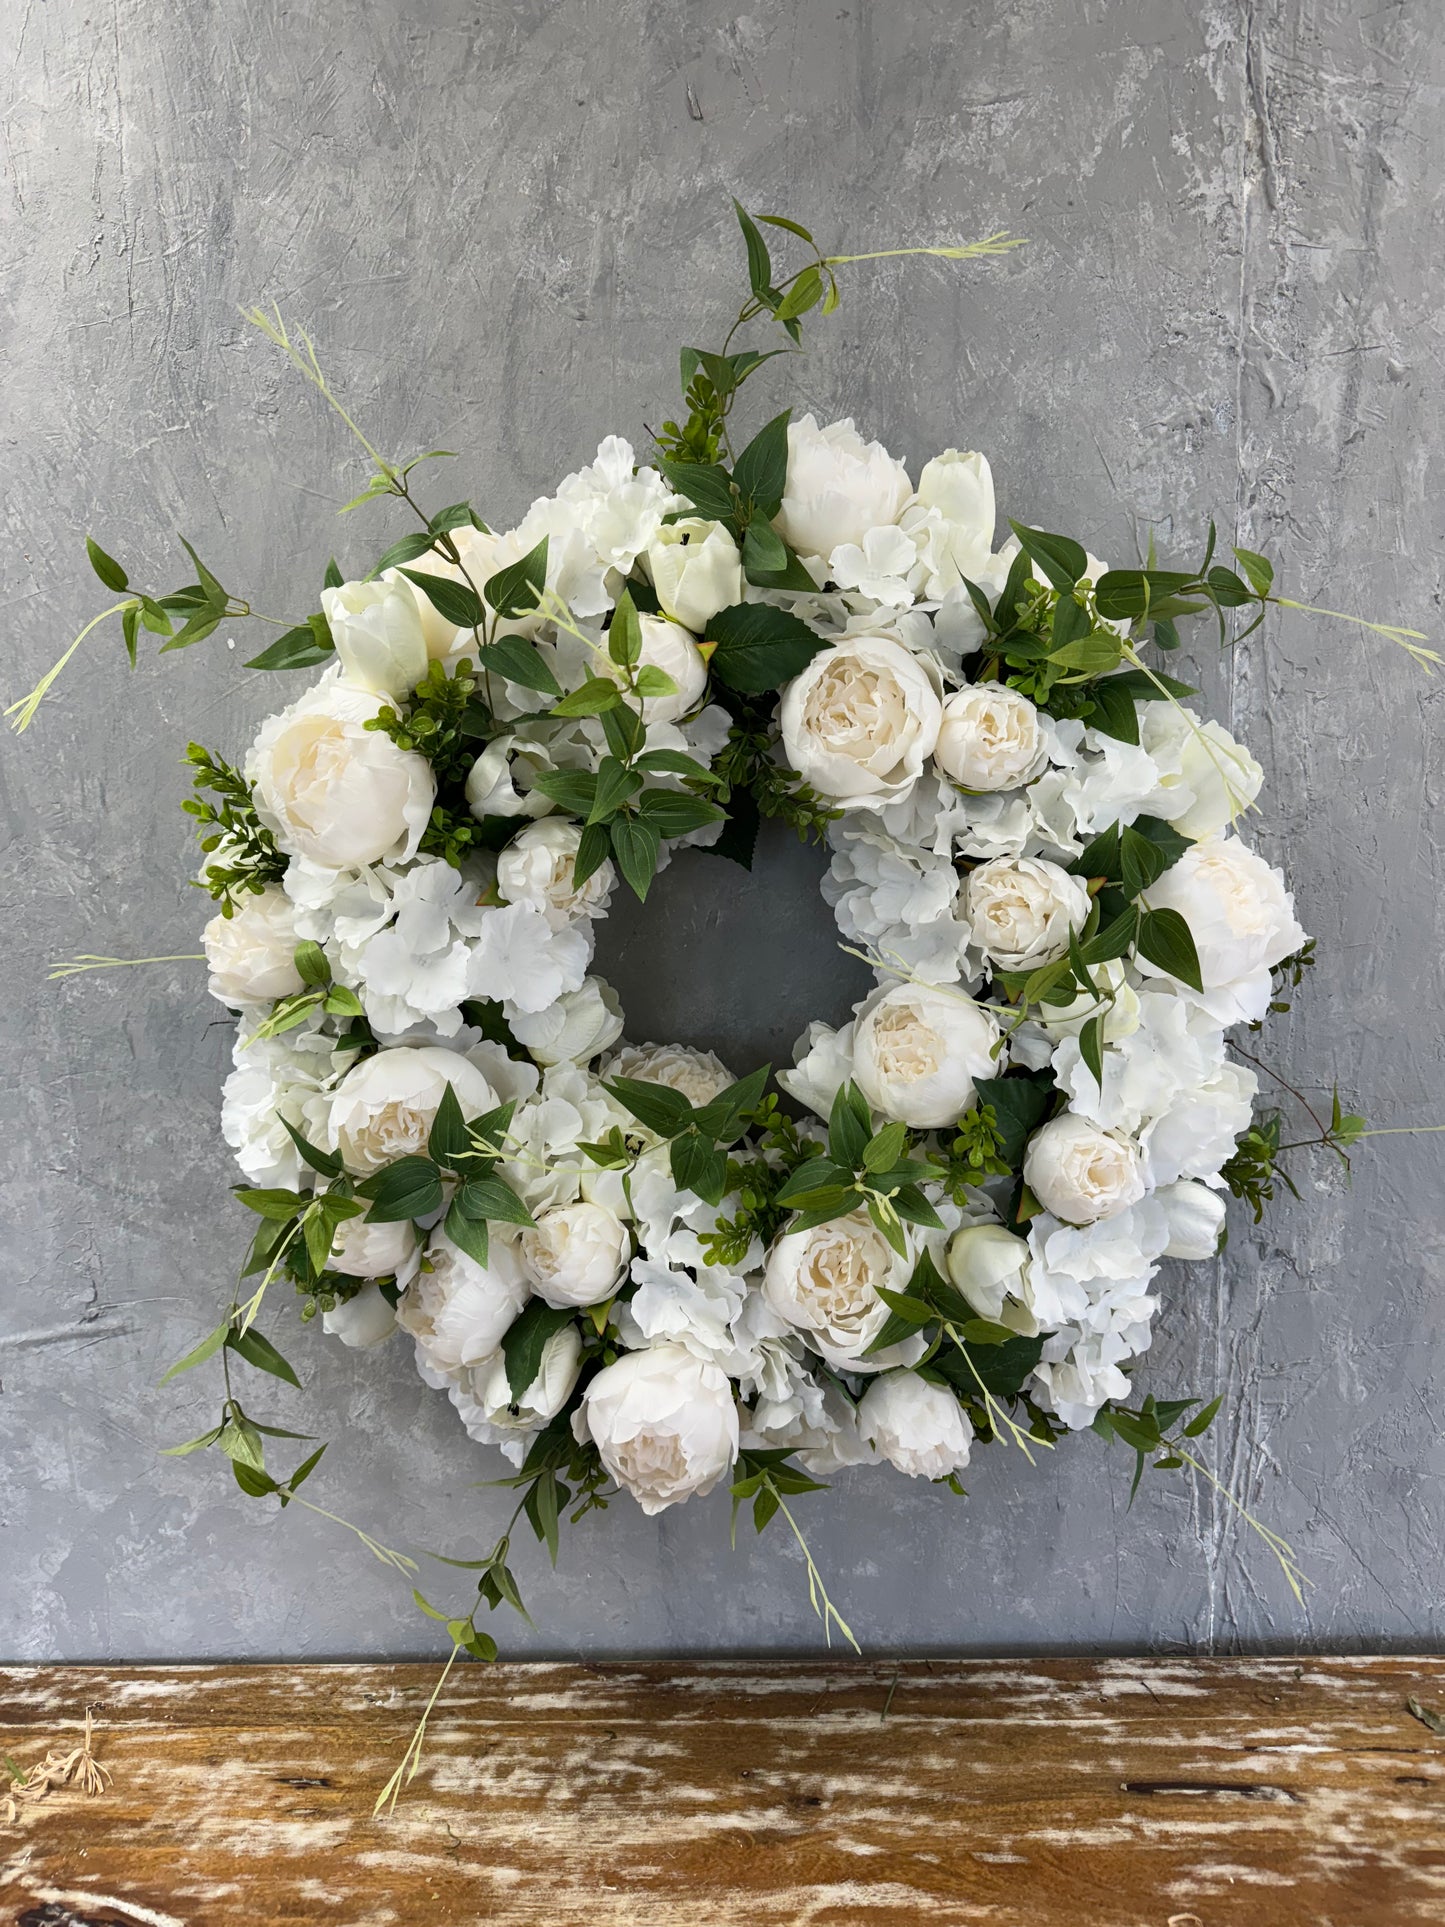 Completed Neutral Wreath in White and Green {Custom Wreath}